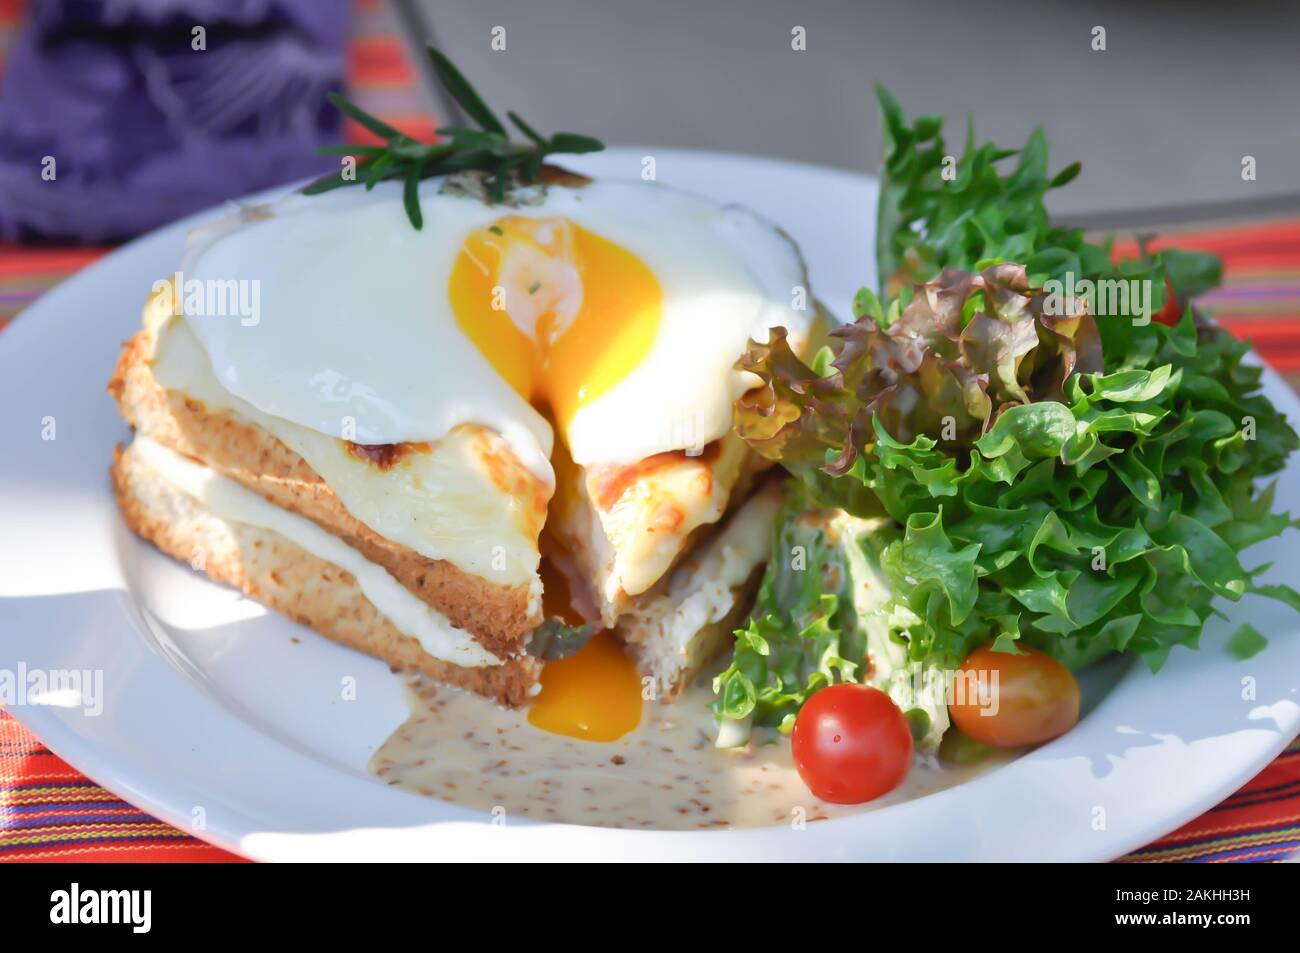 toast or cheese and egg sandwich with salad Stock Photo